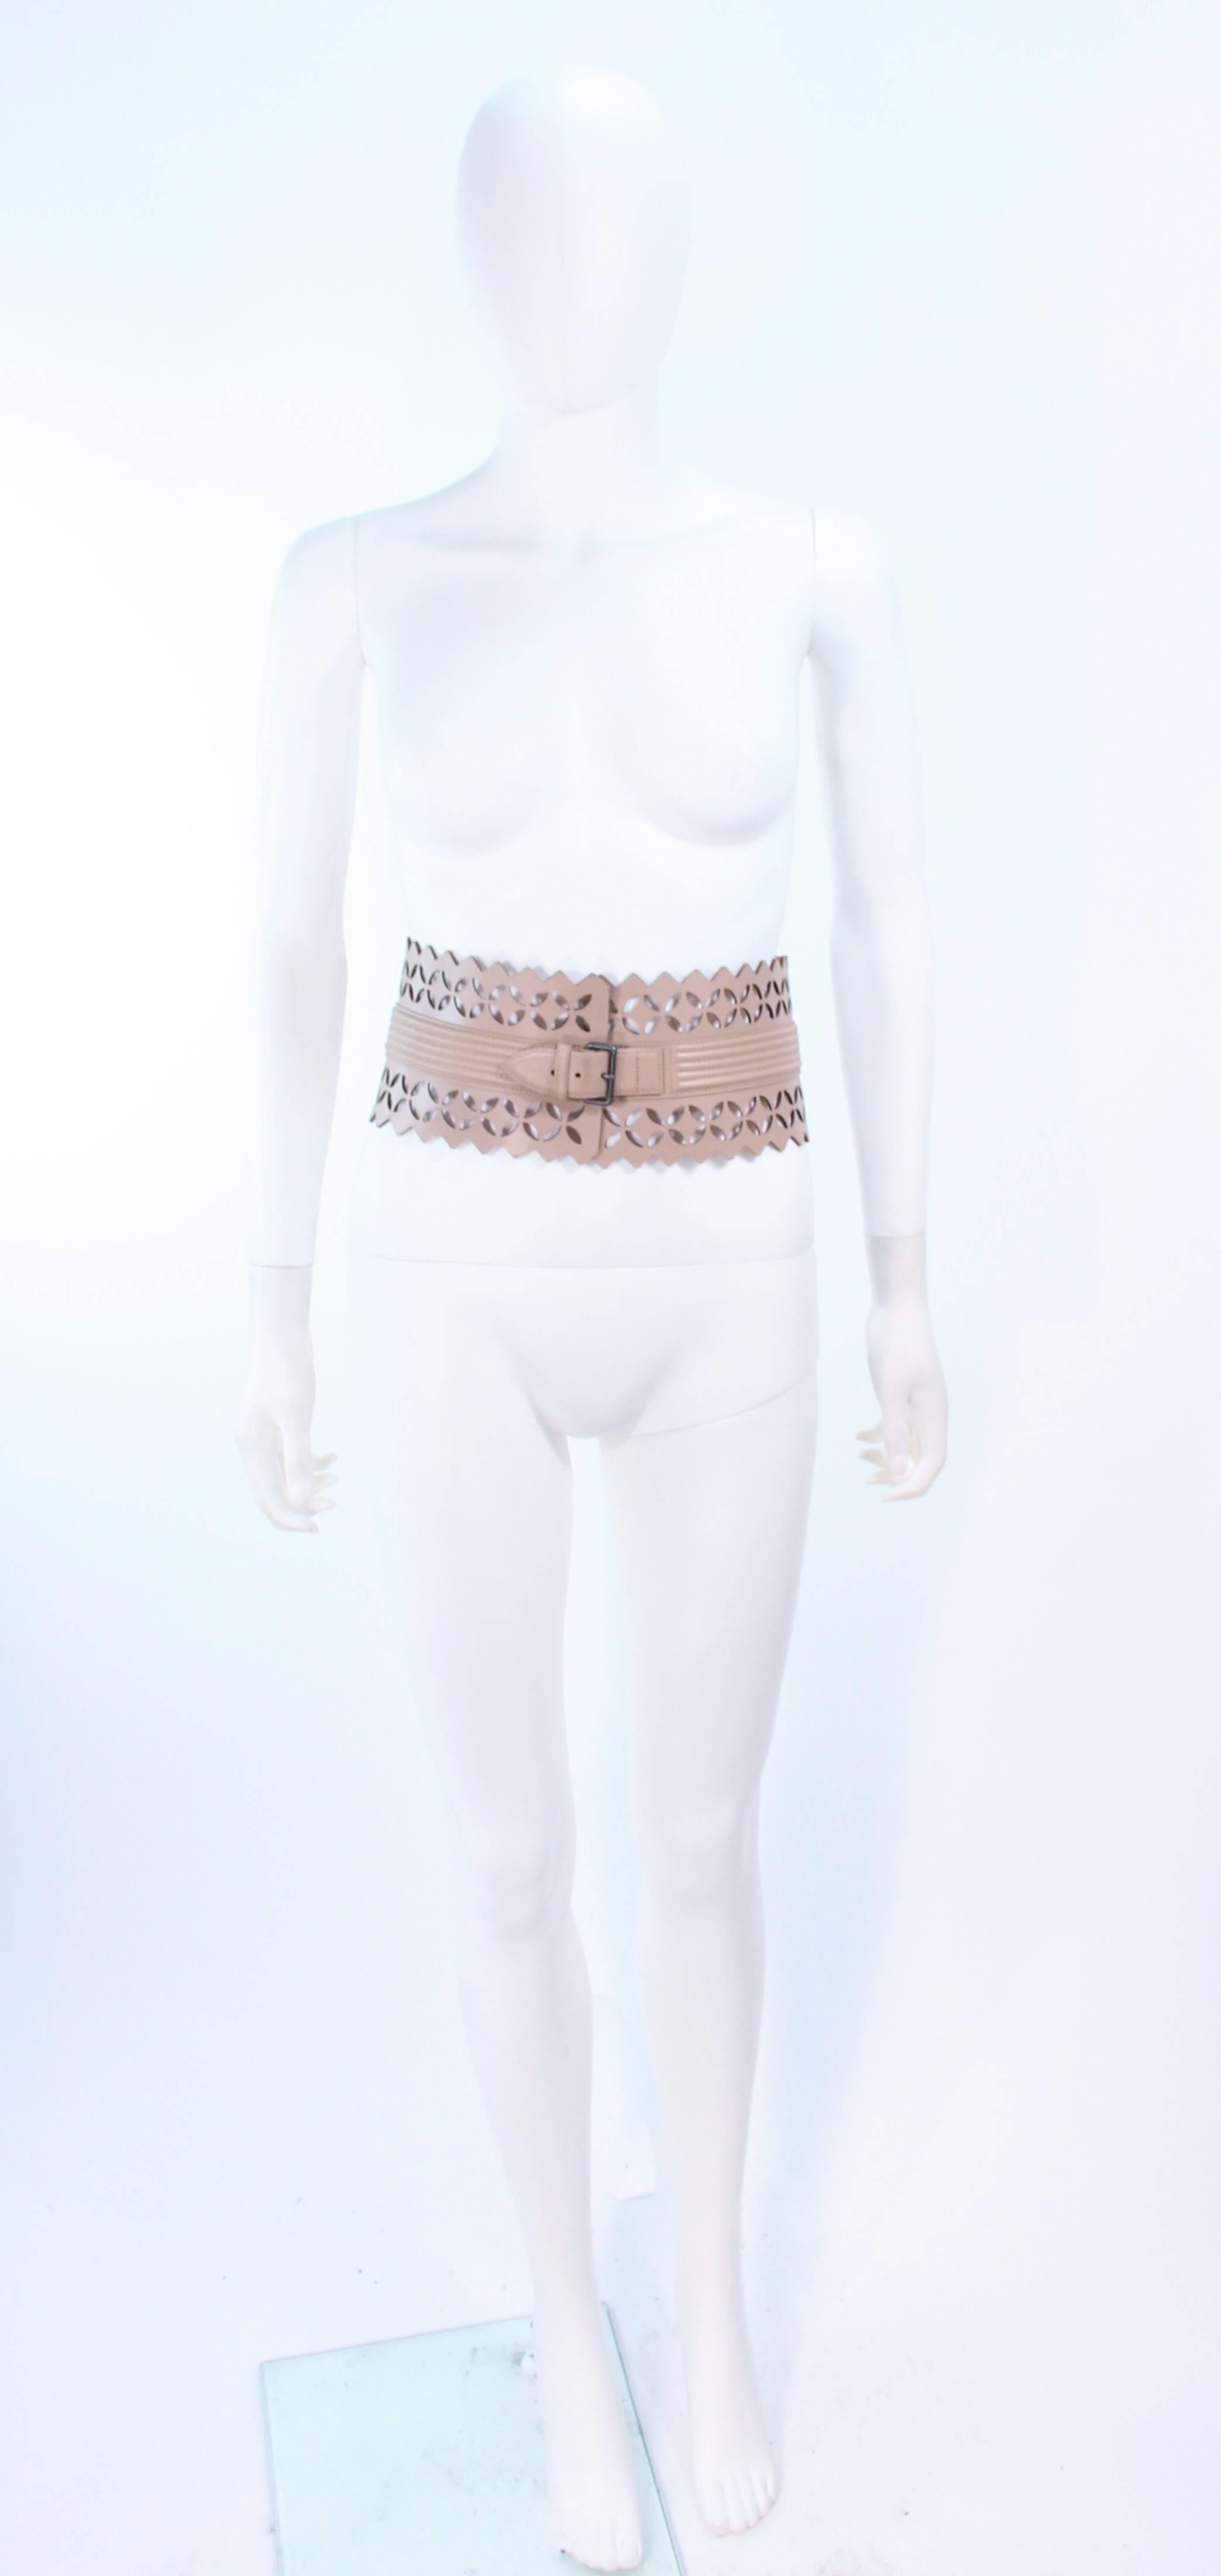 This Alaia belt is composed of a nude leather with a laser cut detailing. Features a center front adjustable buckle. In excellent pre-owned condition, slight signs of wear.

**Please cross-reference measurements for personal accuracy. Size in